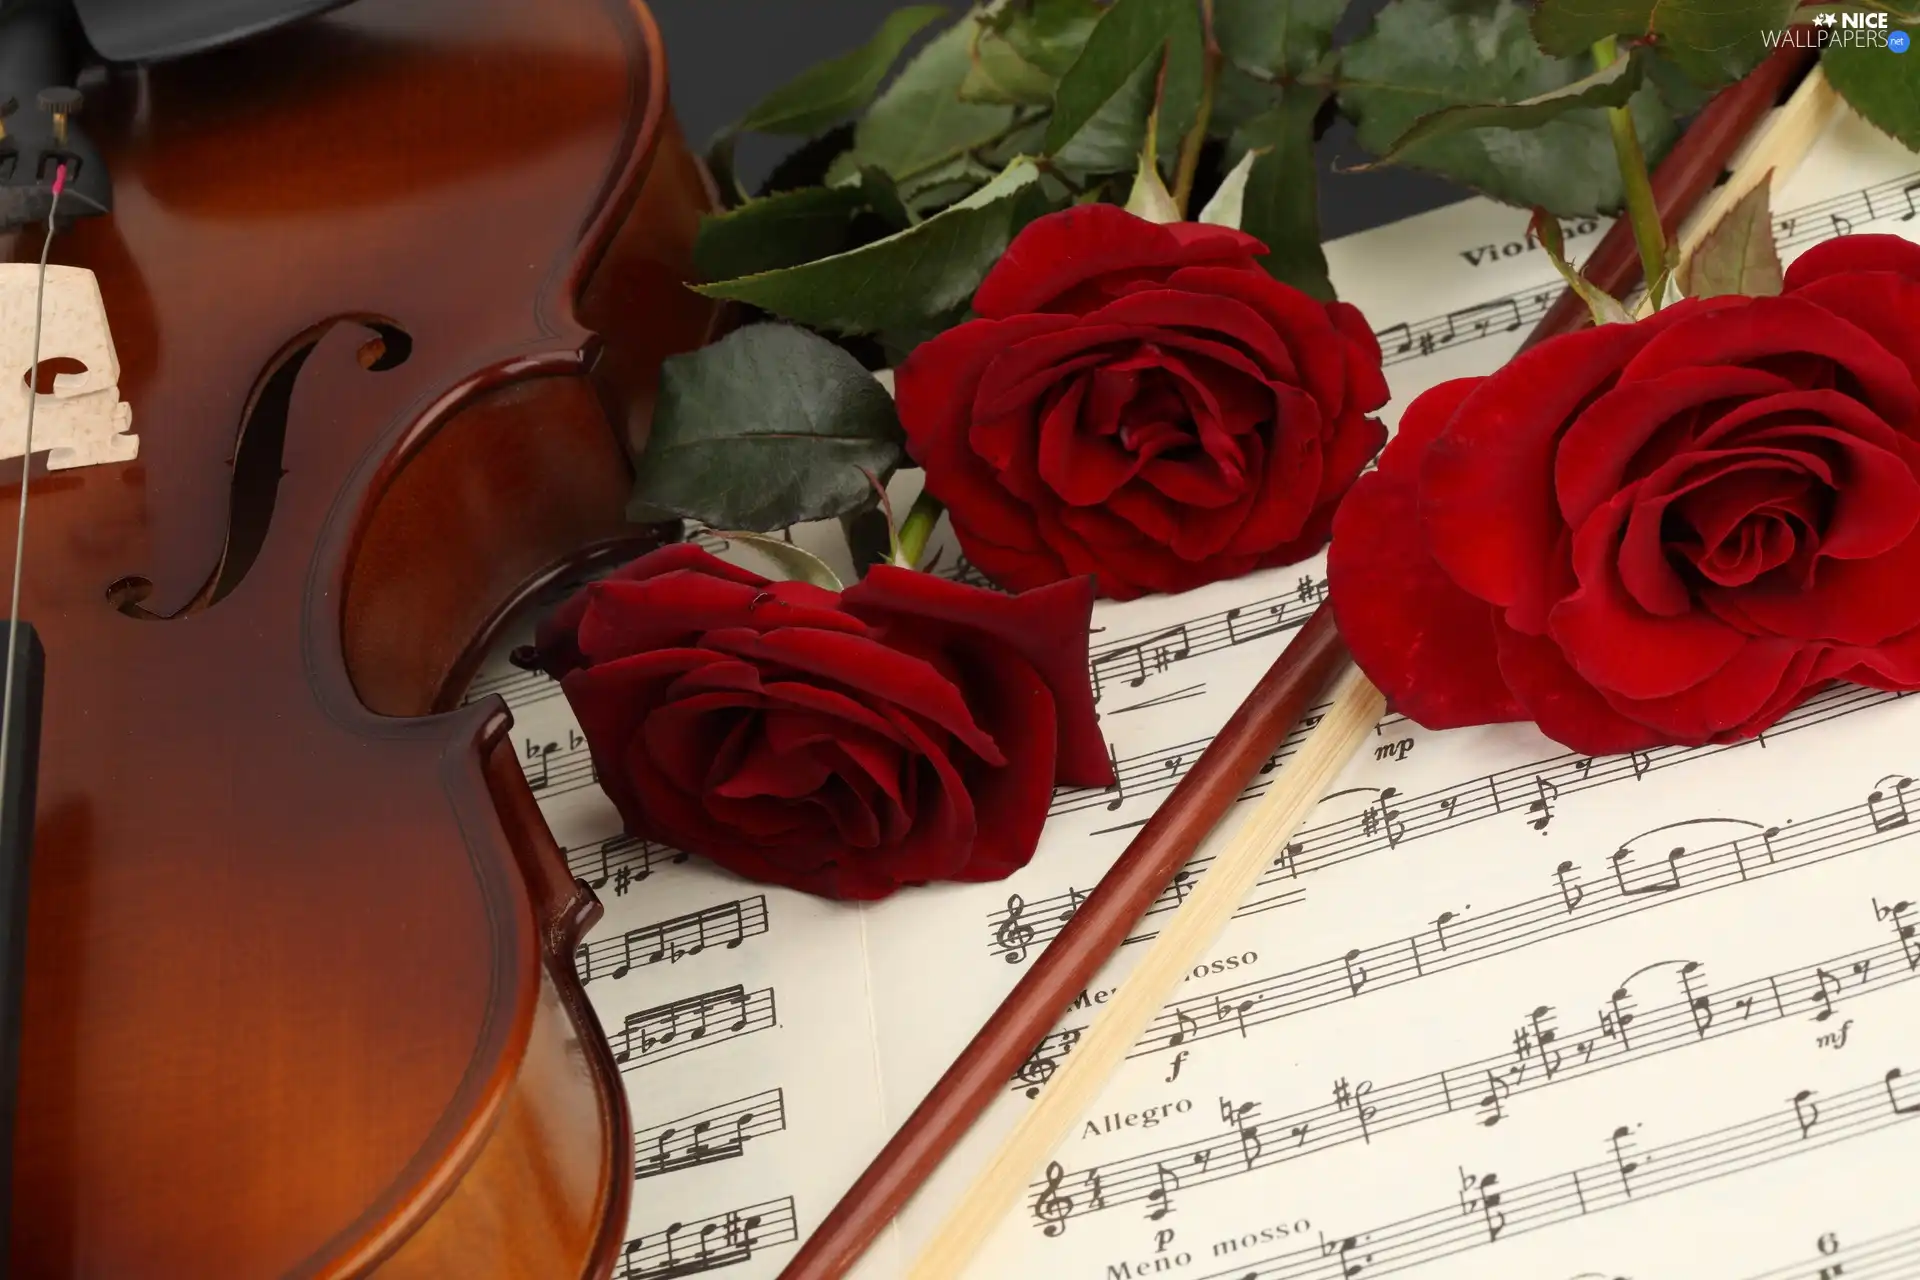 Tunes, roses, instrument, musical, violin - Nice ...